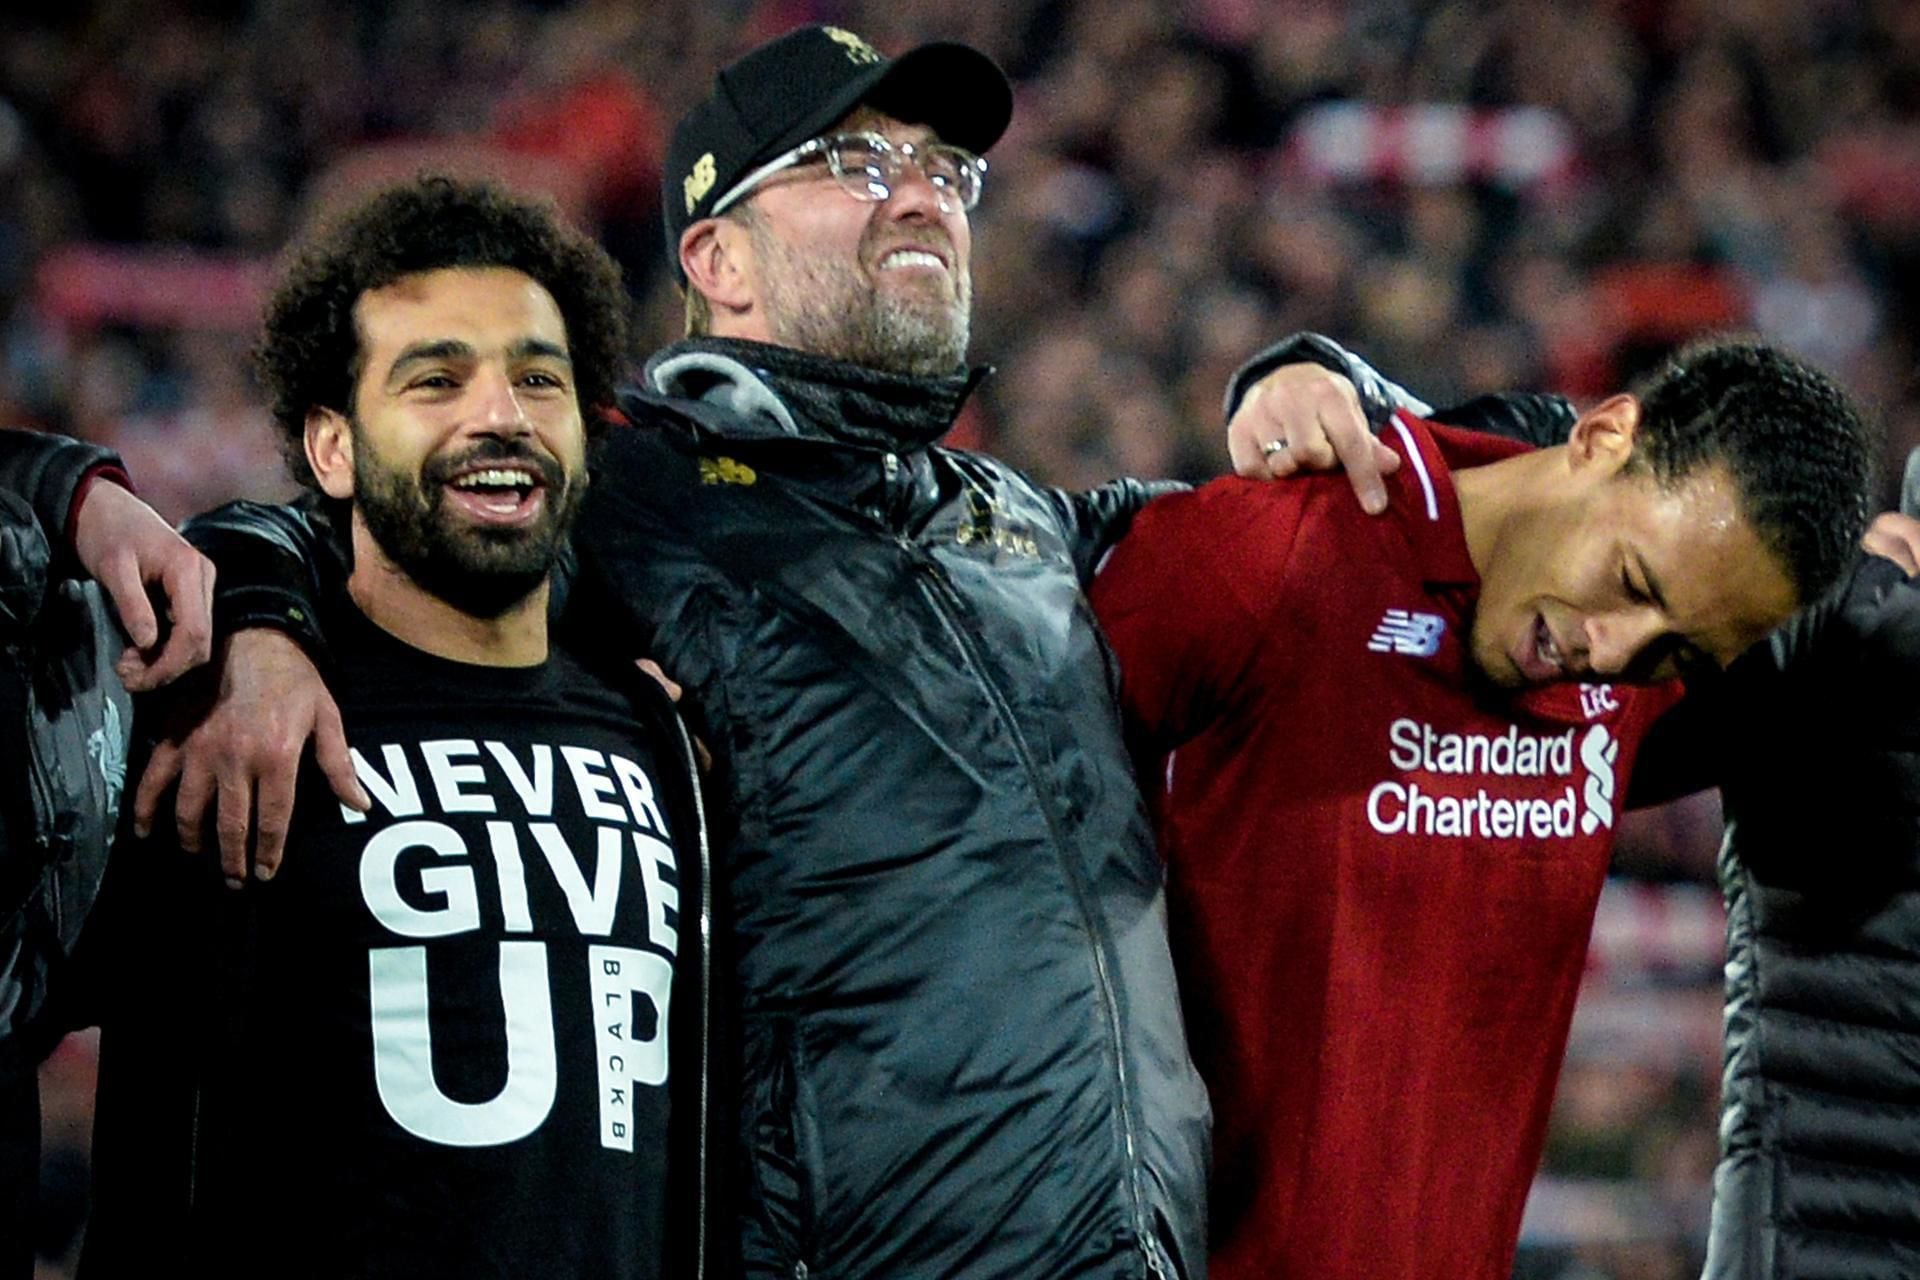 Mo Salah Never GIVE UP t Shirt Champions League Madrid 2019 Liverpool Slogan Football Black S- 34/36 INCH Chest 